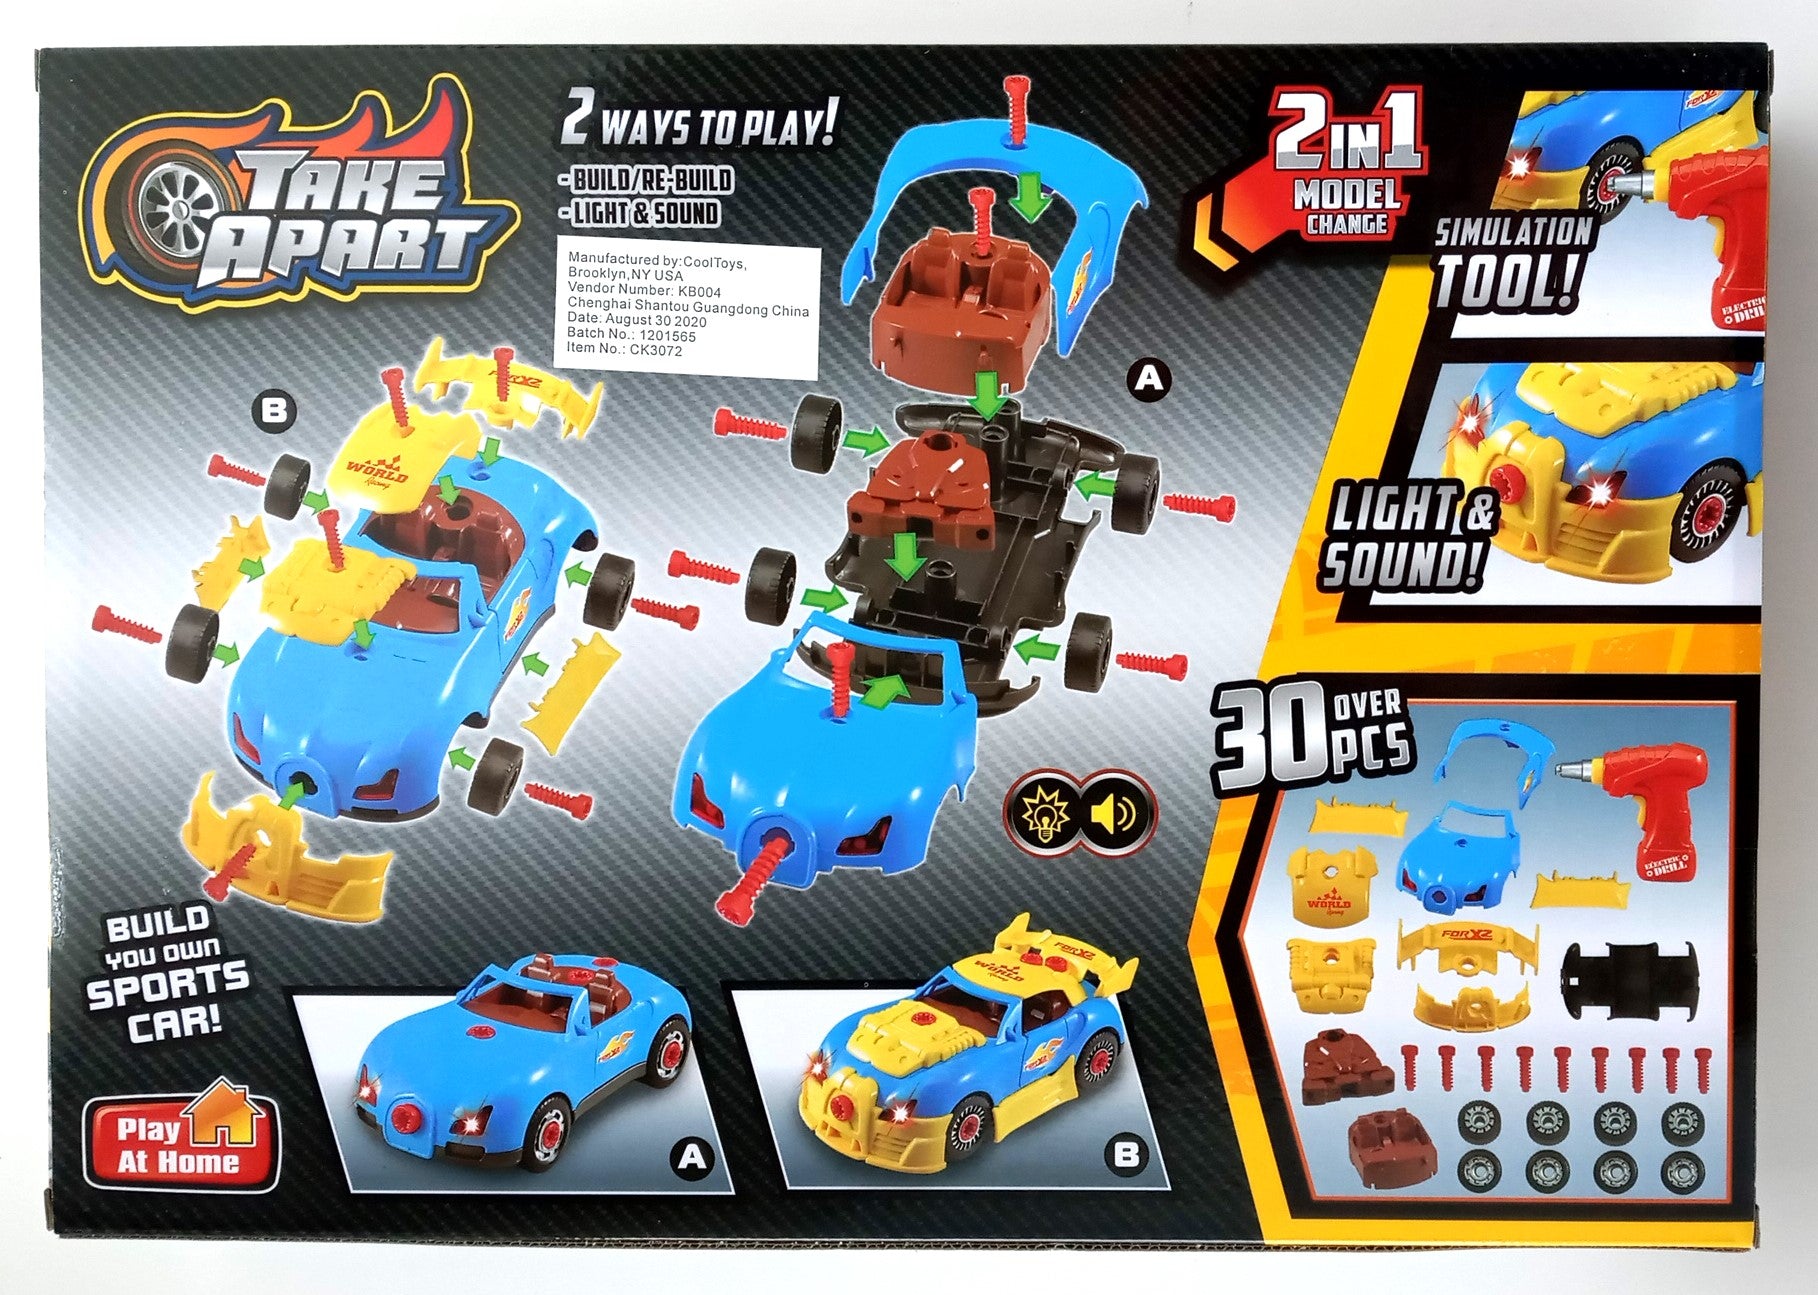 Take Apart Racing Car Toys - Build Your Own Assembly Vehicle with 30 Piece Const